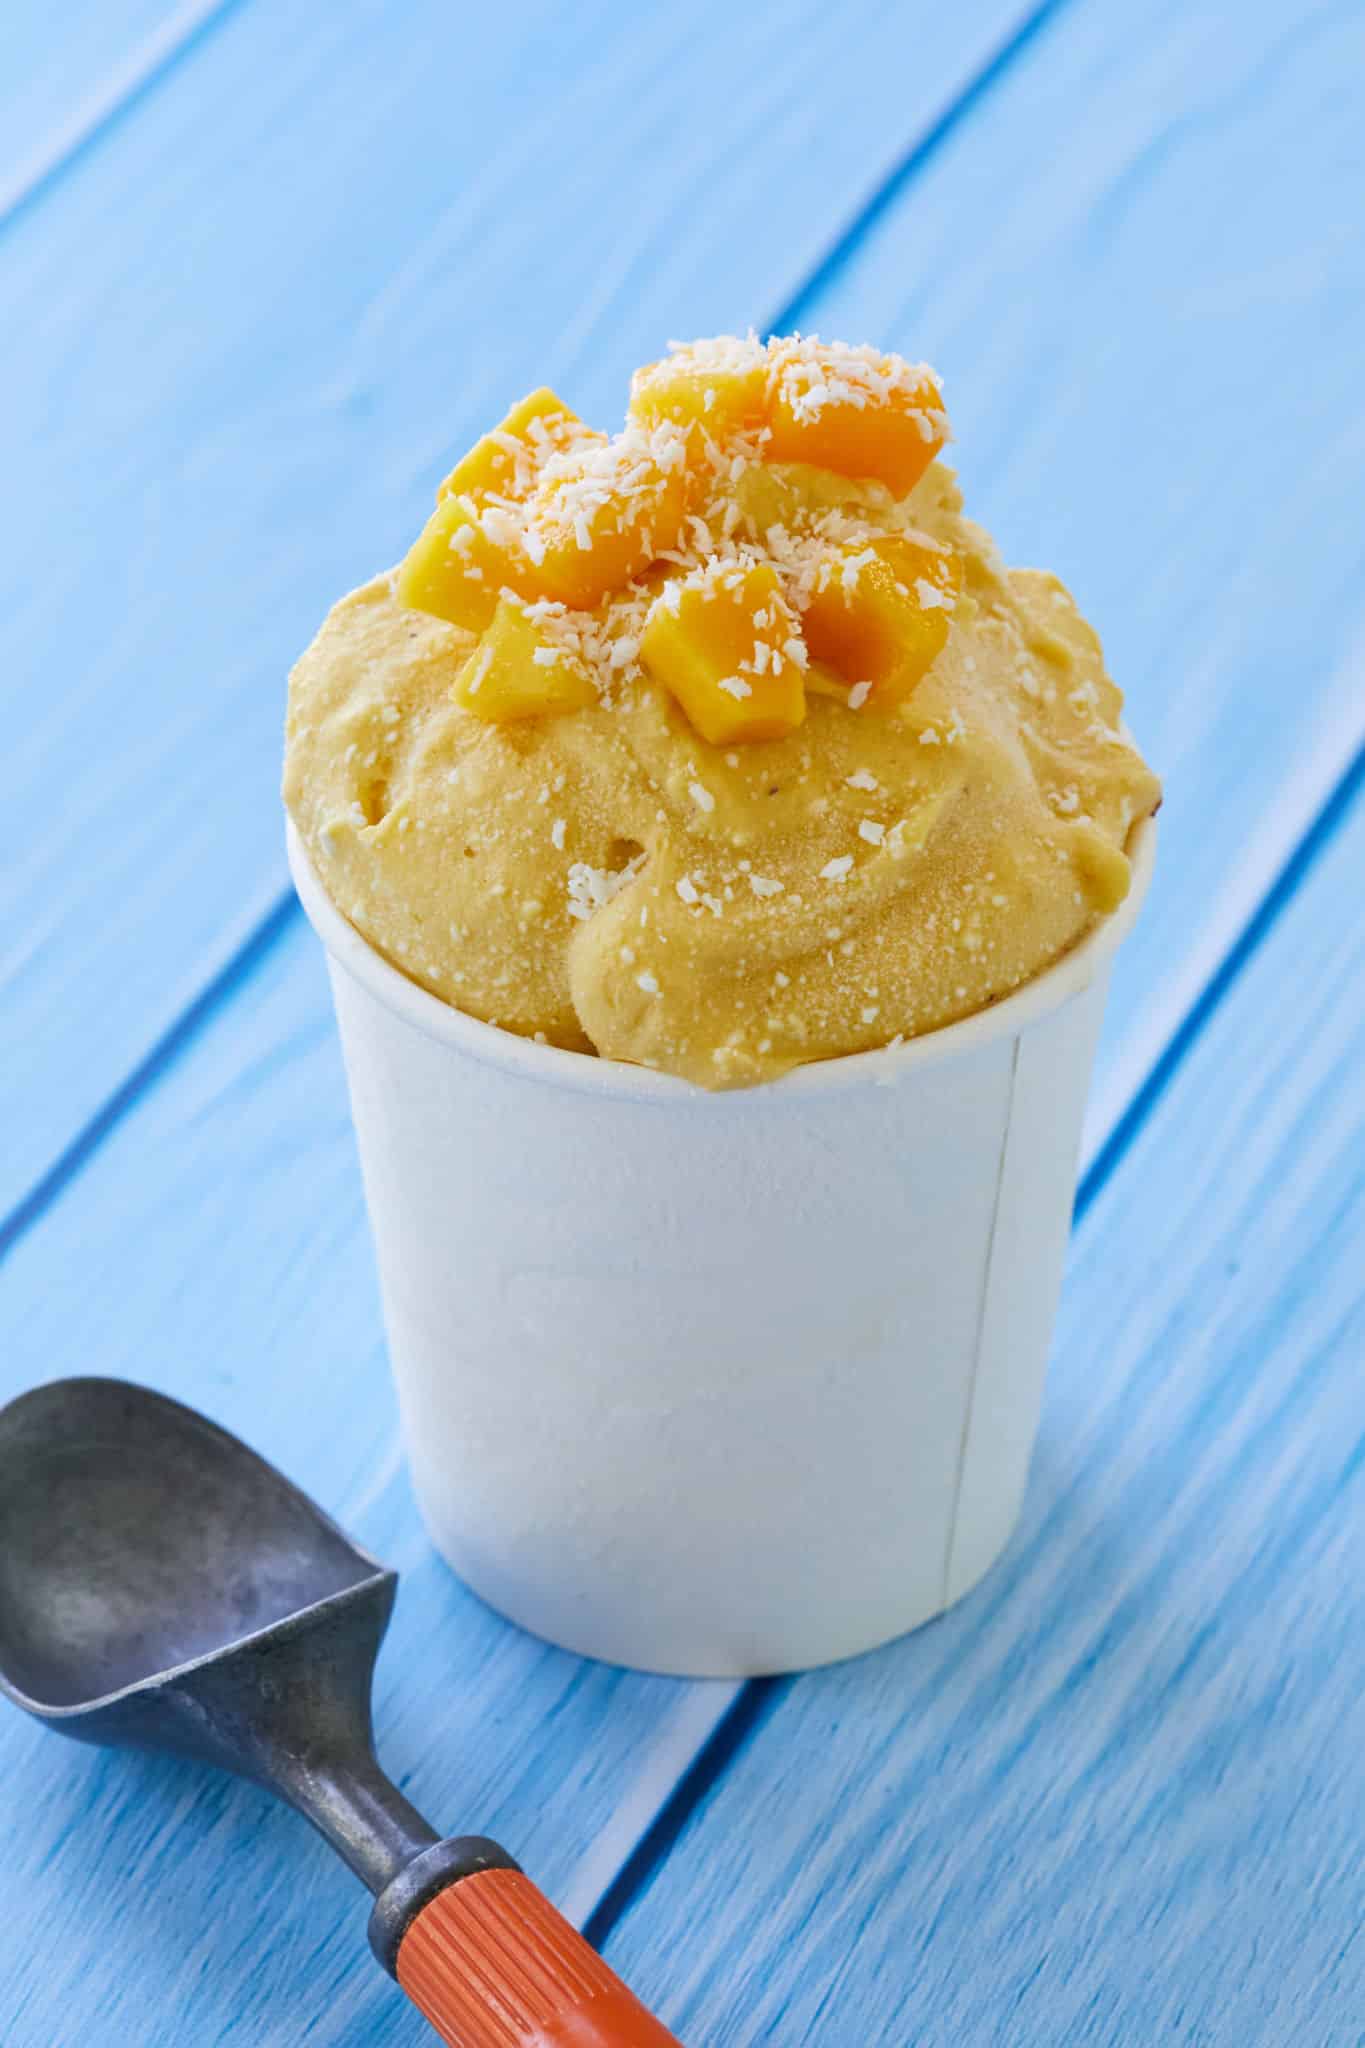 Homemade nice cream is served in a paper cup. The mango coconut ice cream is topped with fresh mango and coconut shavings.